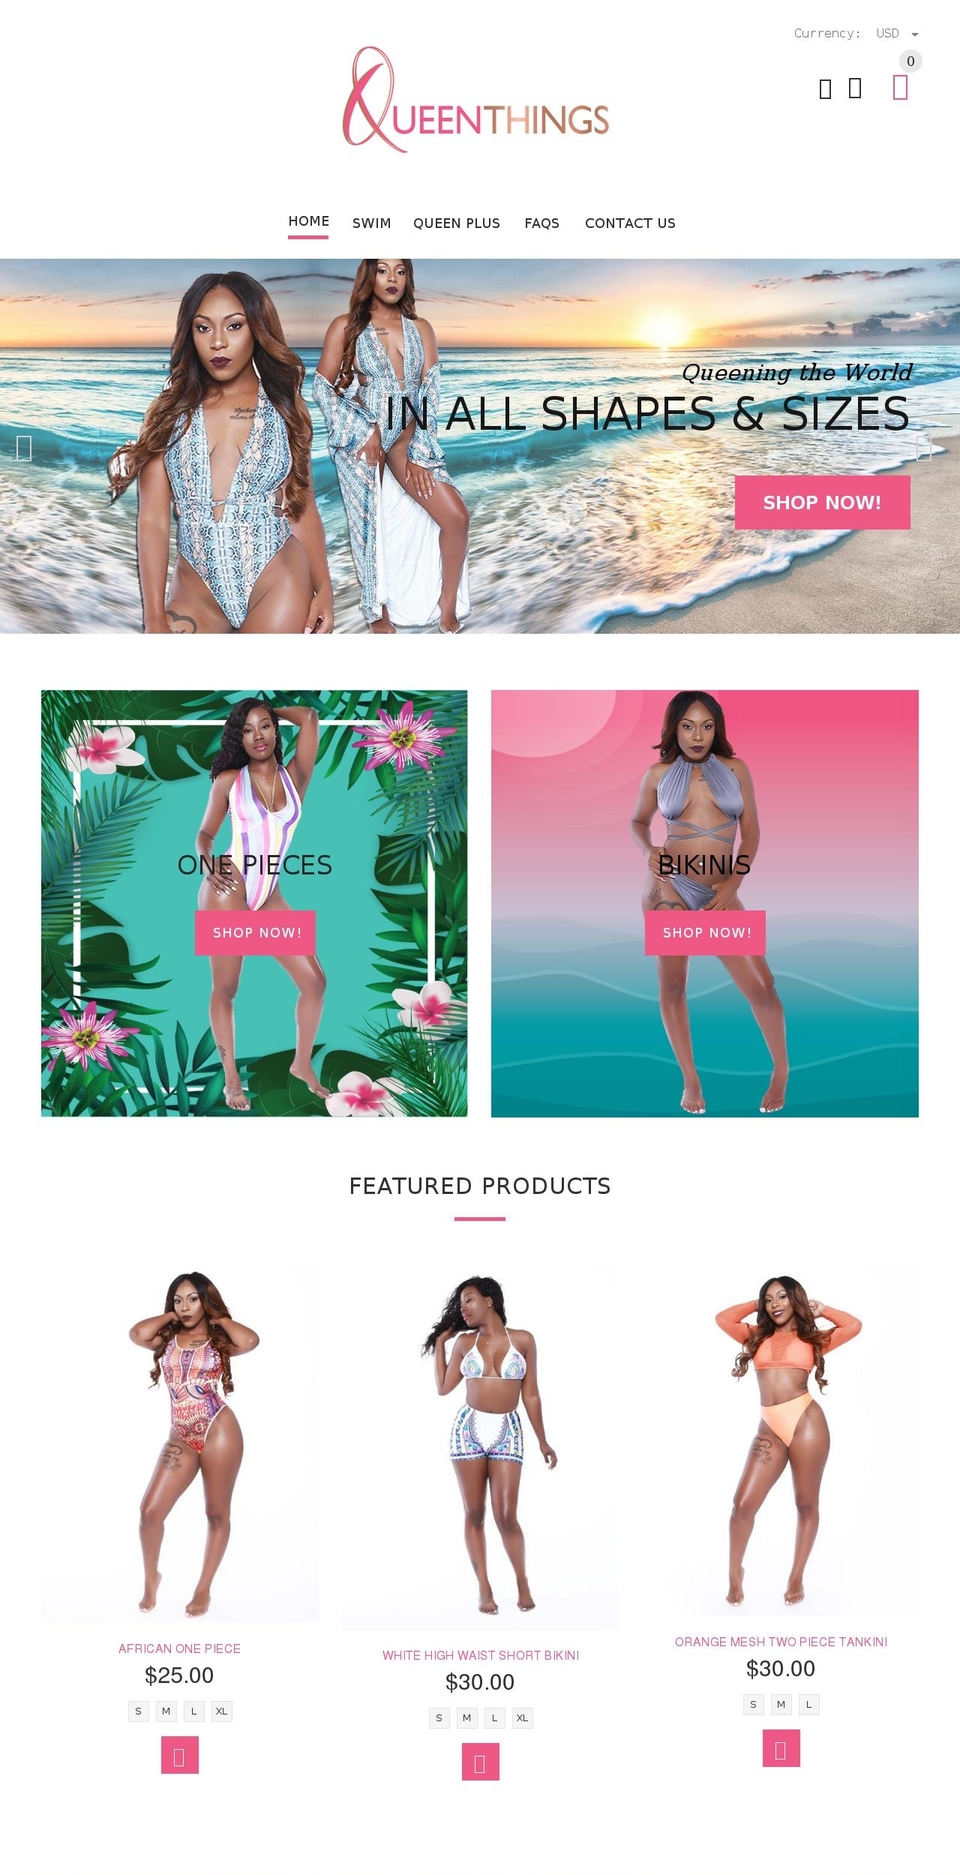 QUEEN Shopify theme site example shopqueenthings.com